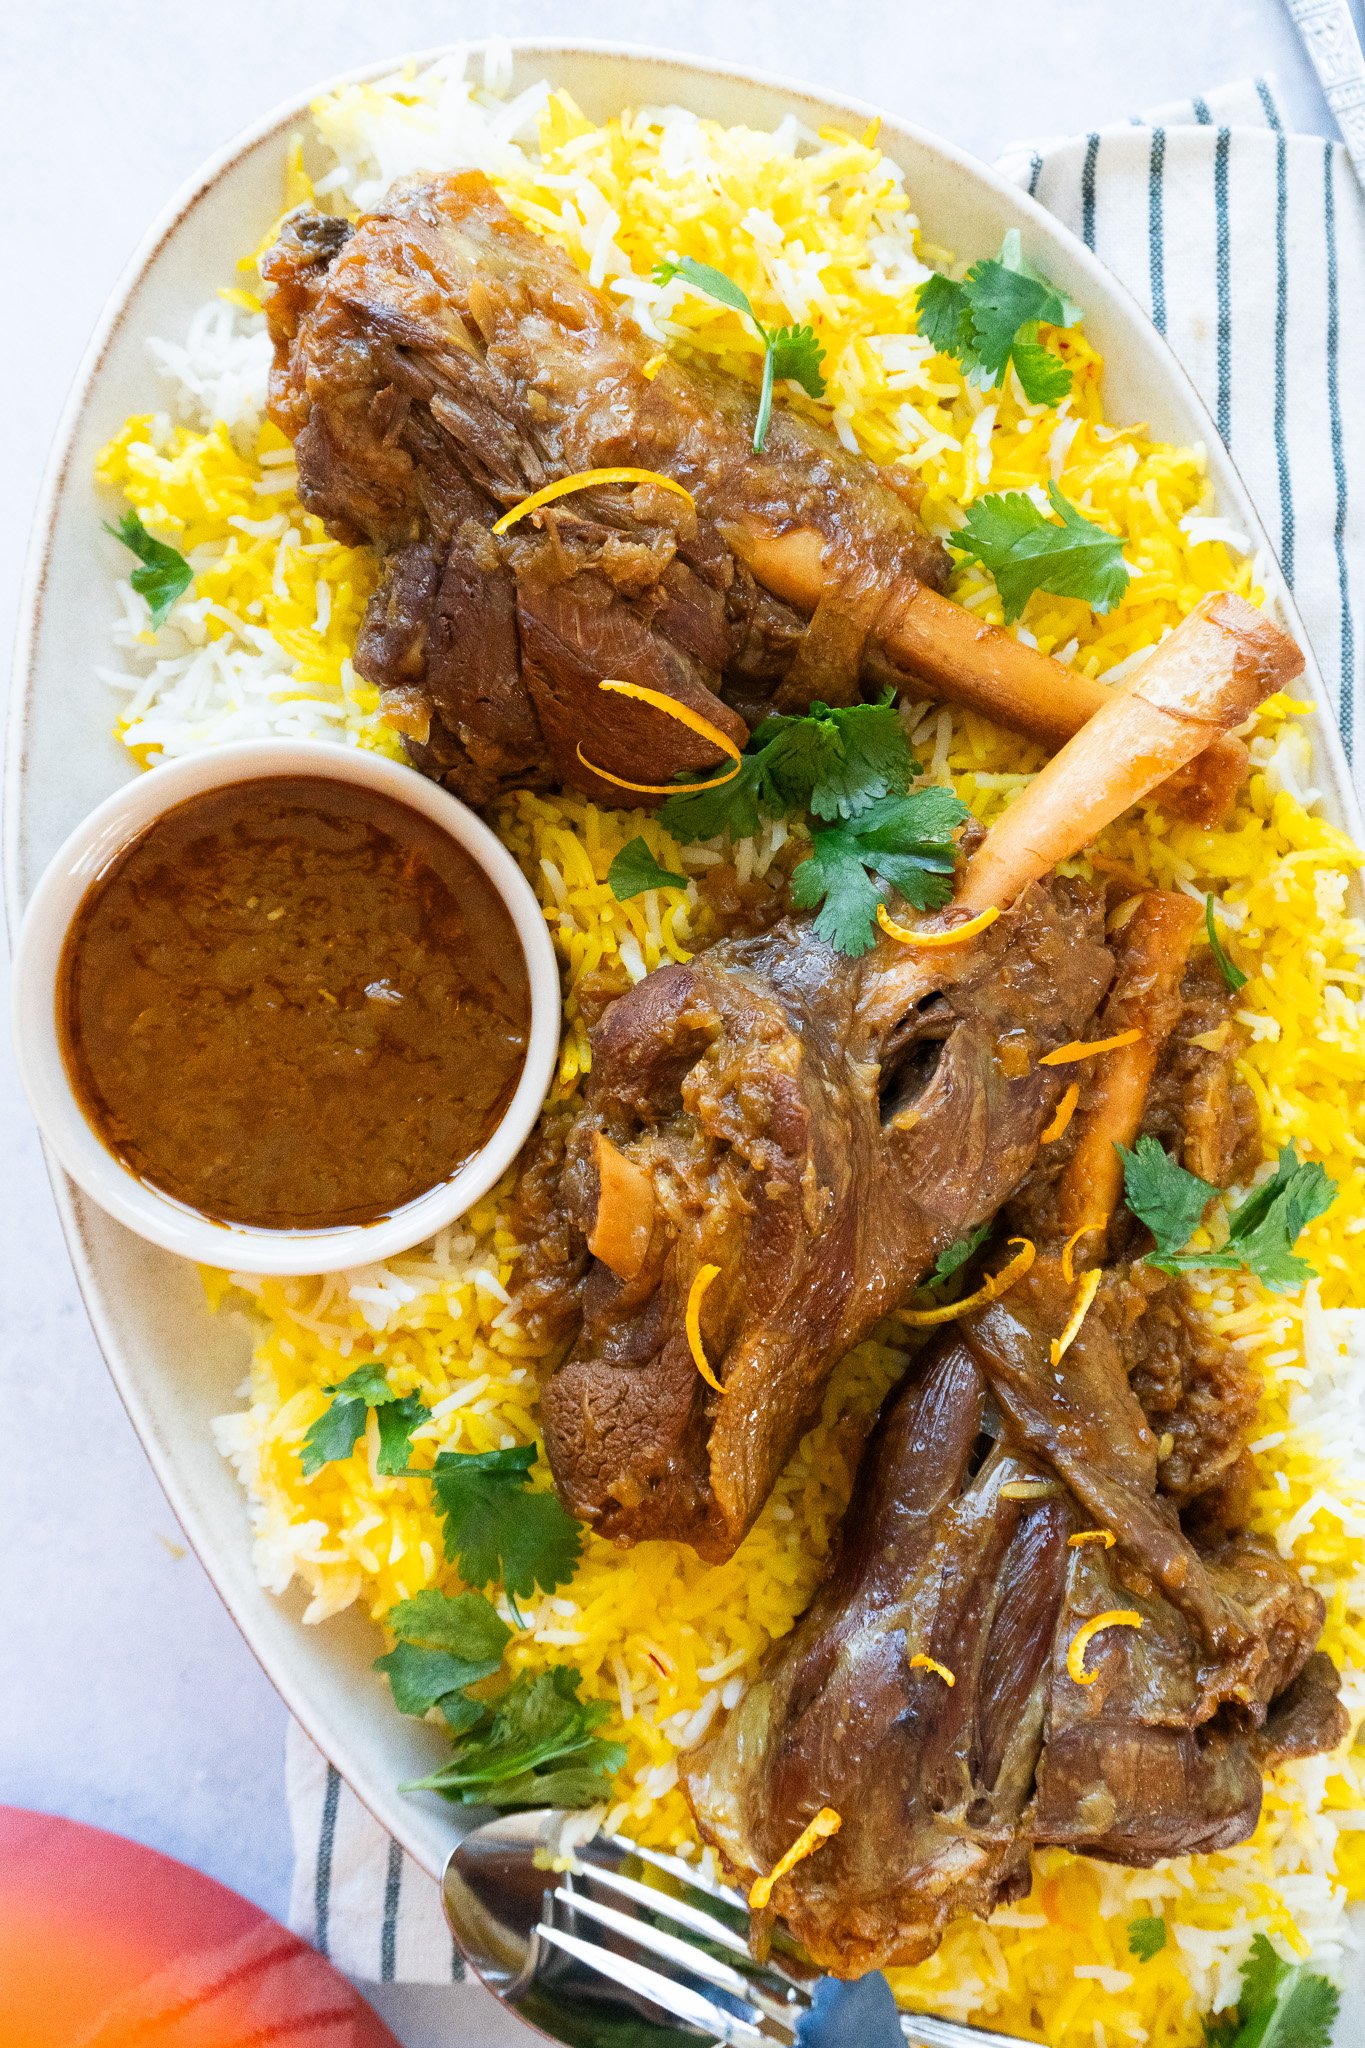 Delicious Persian Lamb Shank Recipe - Aromatic and tender lamb shank served with flavorful cooking juices.